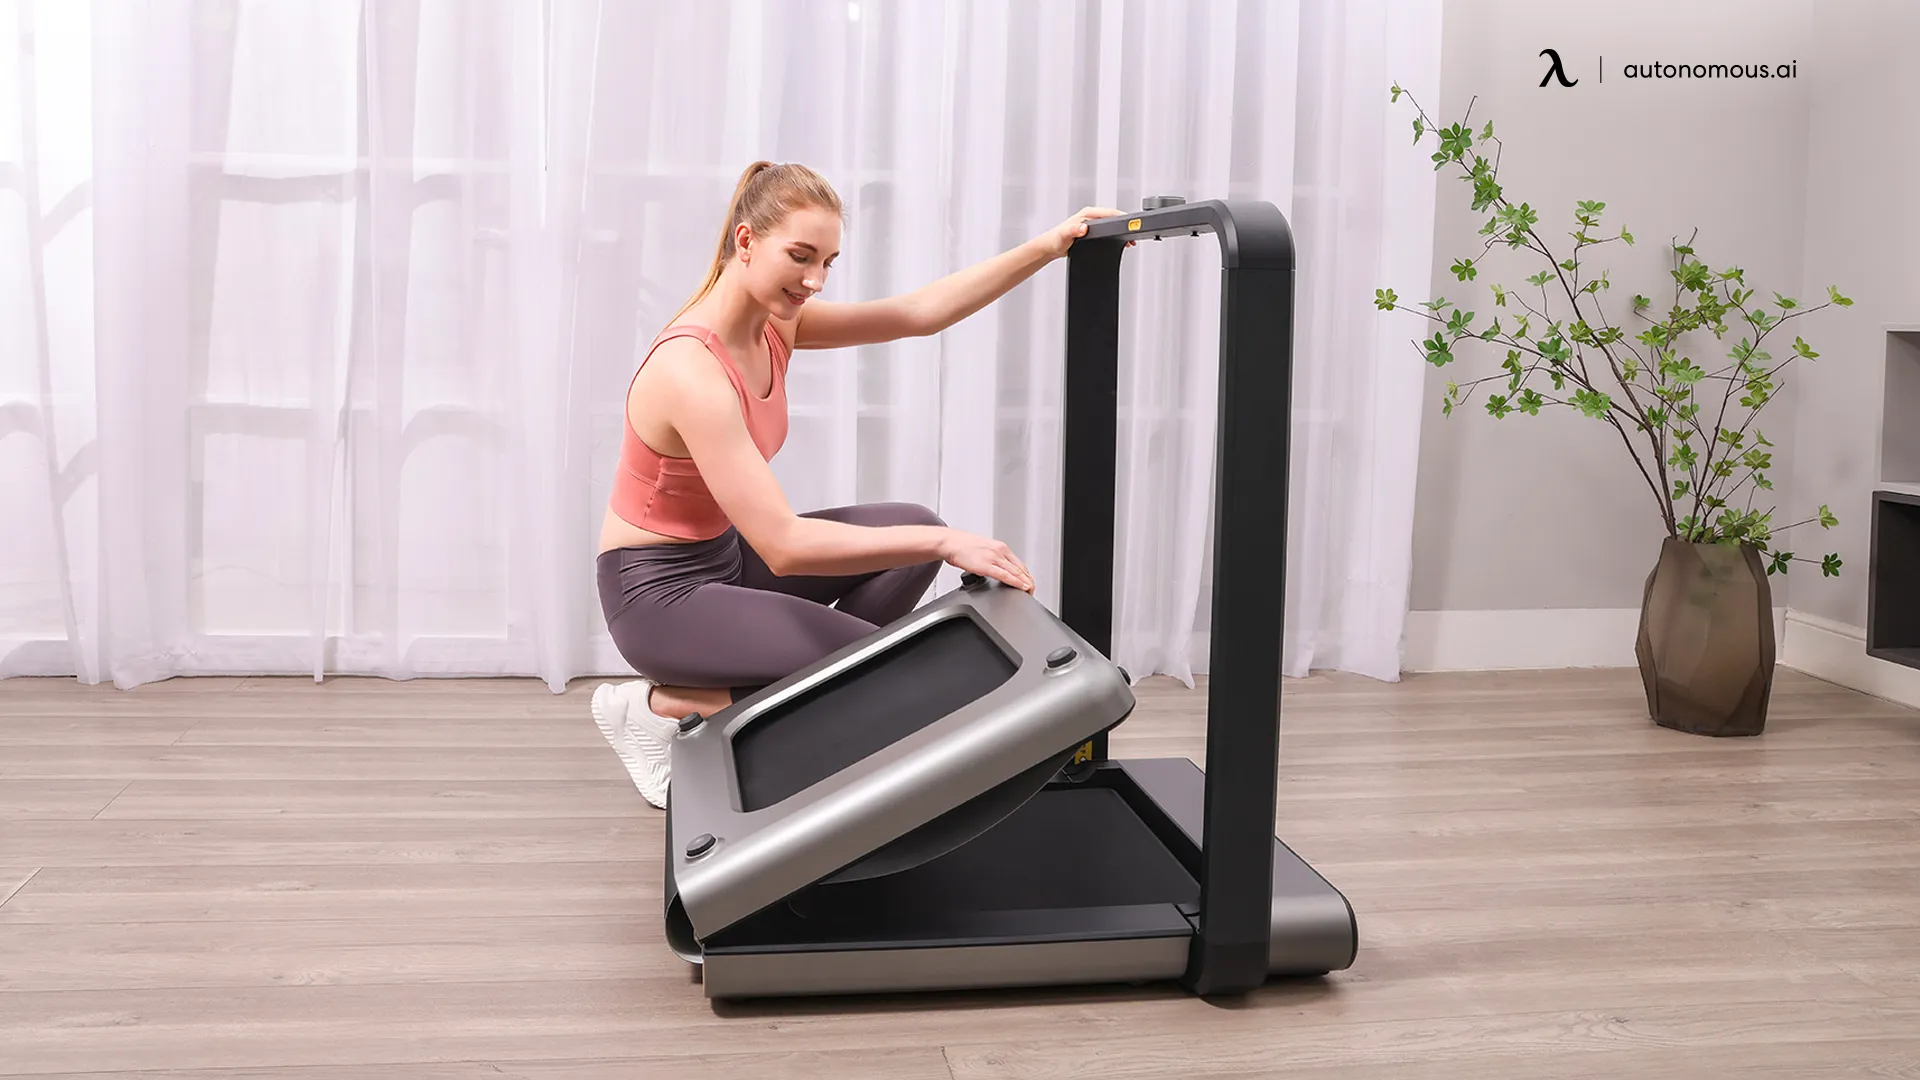 How does the WalkingPad X21 compare to other treadmills?